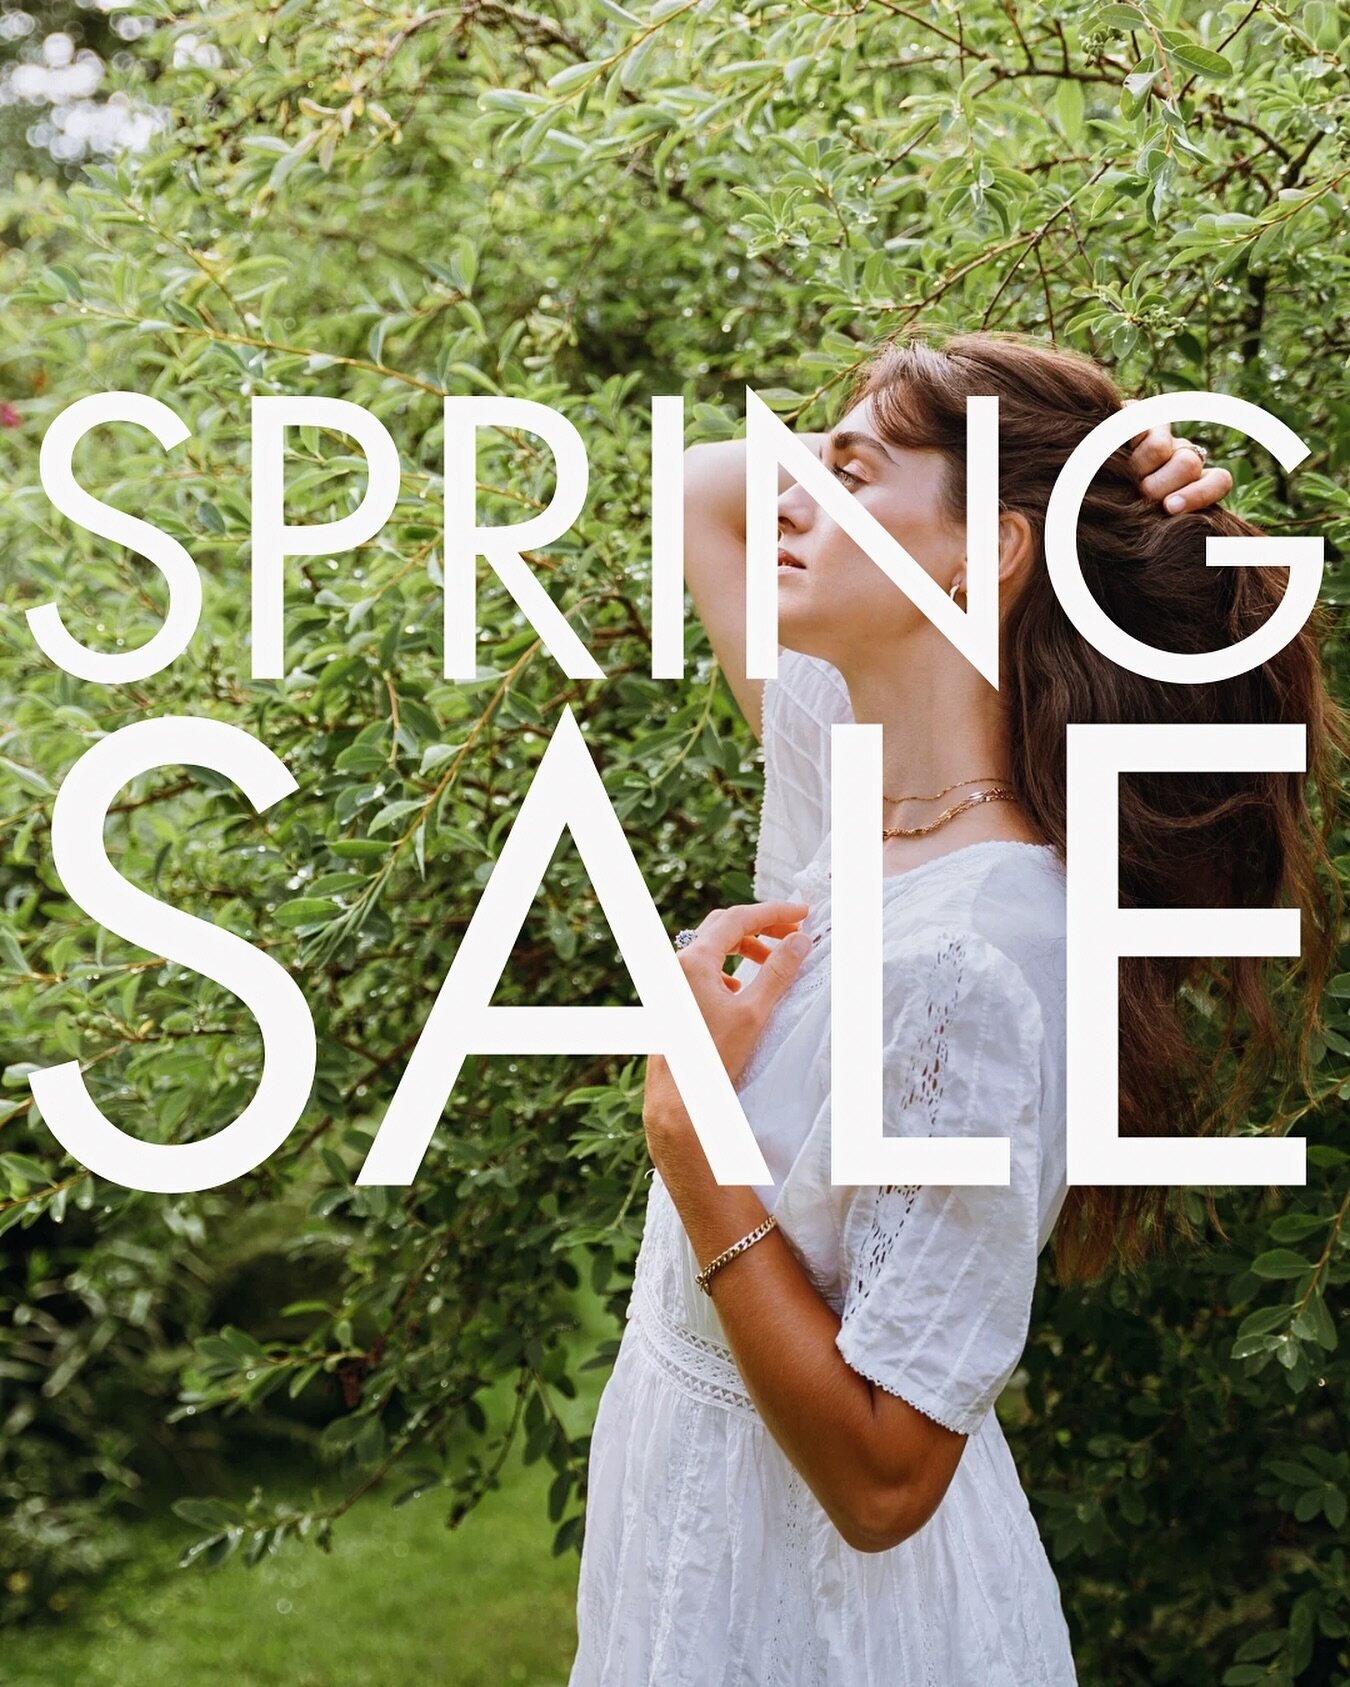 We&rsquo;re having a Spring Clearance! Visit J&amp;A to save up to 40% on one-of-a-kind vintage &amp; antique jewellery, including rings, earrings, bracelets and necklaces. 

Coming soon we&rsquo;ve got some gorgeous new finds for you + a whole new c